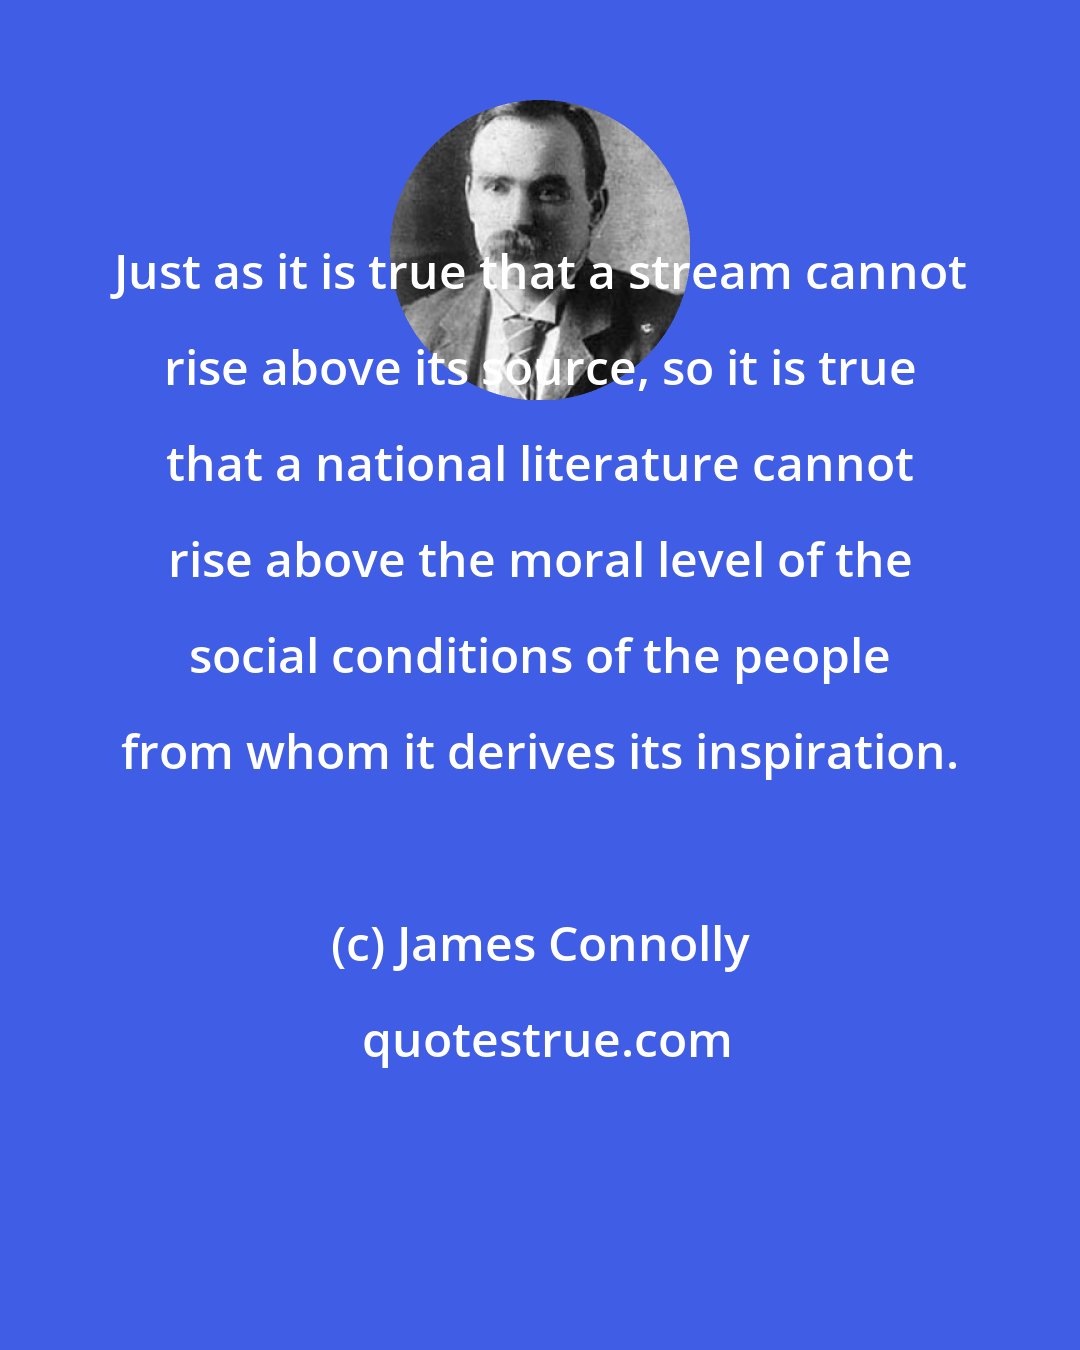 James Connolly: Just as it is true that a stream cannot rise above its source, so it is true that a national literature cannot rise above the moral level of the social conditions of the people from whom it derives its inspiration.